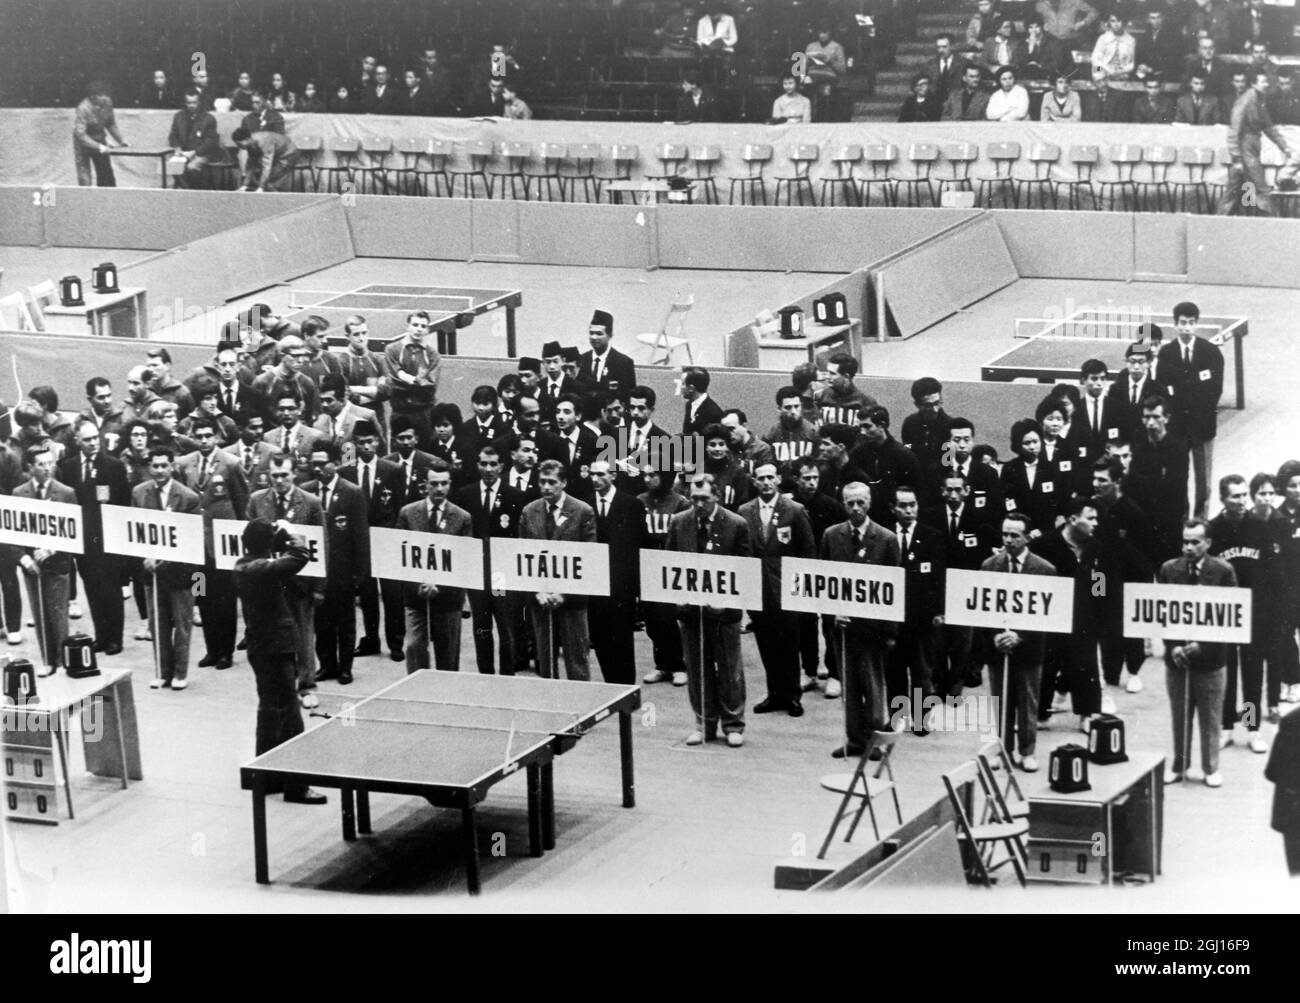 TABLE TENNIS VIEW TEAMS - WORLD TENNIS CHAMPIONSHIPS IN PRAGUE ; 9 APRIL 1963 Stock Photo